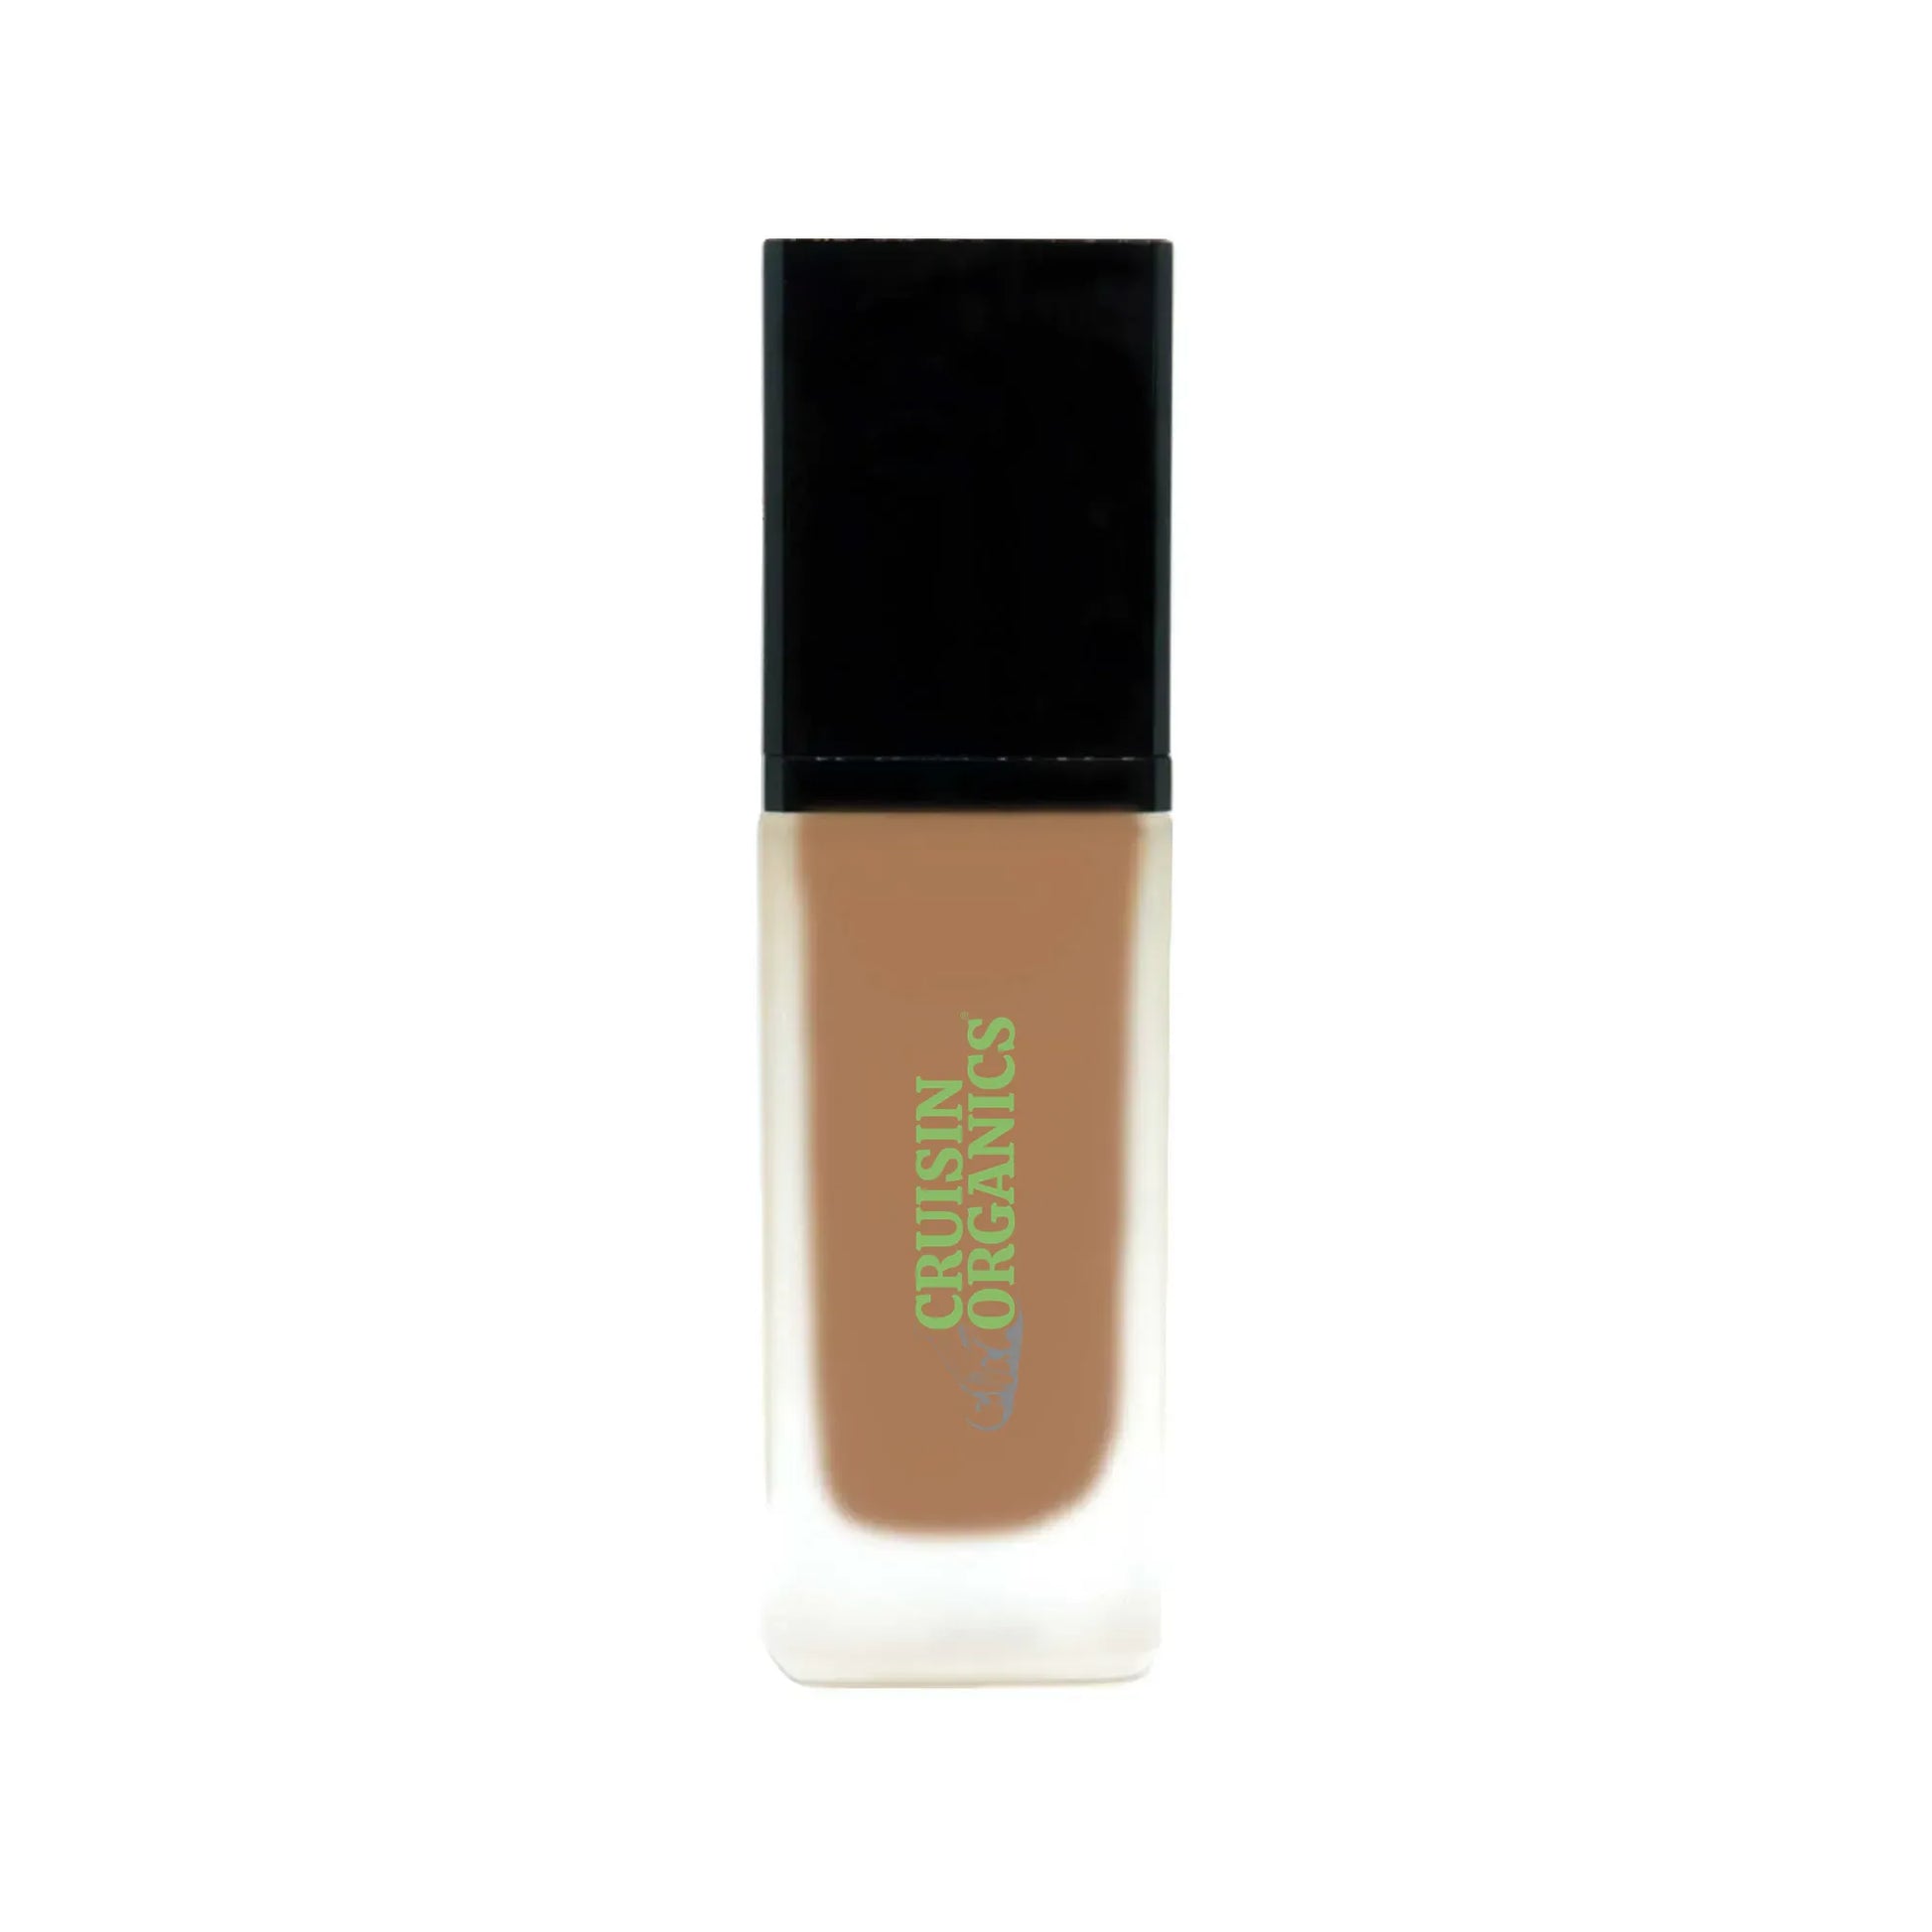 Cruisin Organics Rich Caramel Foundation with SPF provides medium to full buildable coverage, while leaving a dewy natural glow and protecting against the sun with SPF 15.